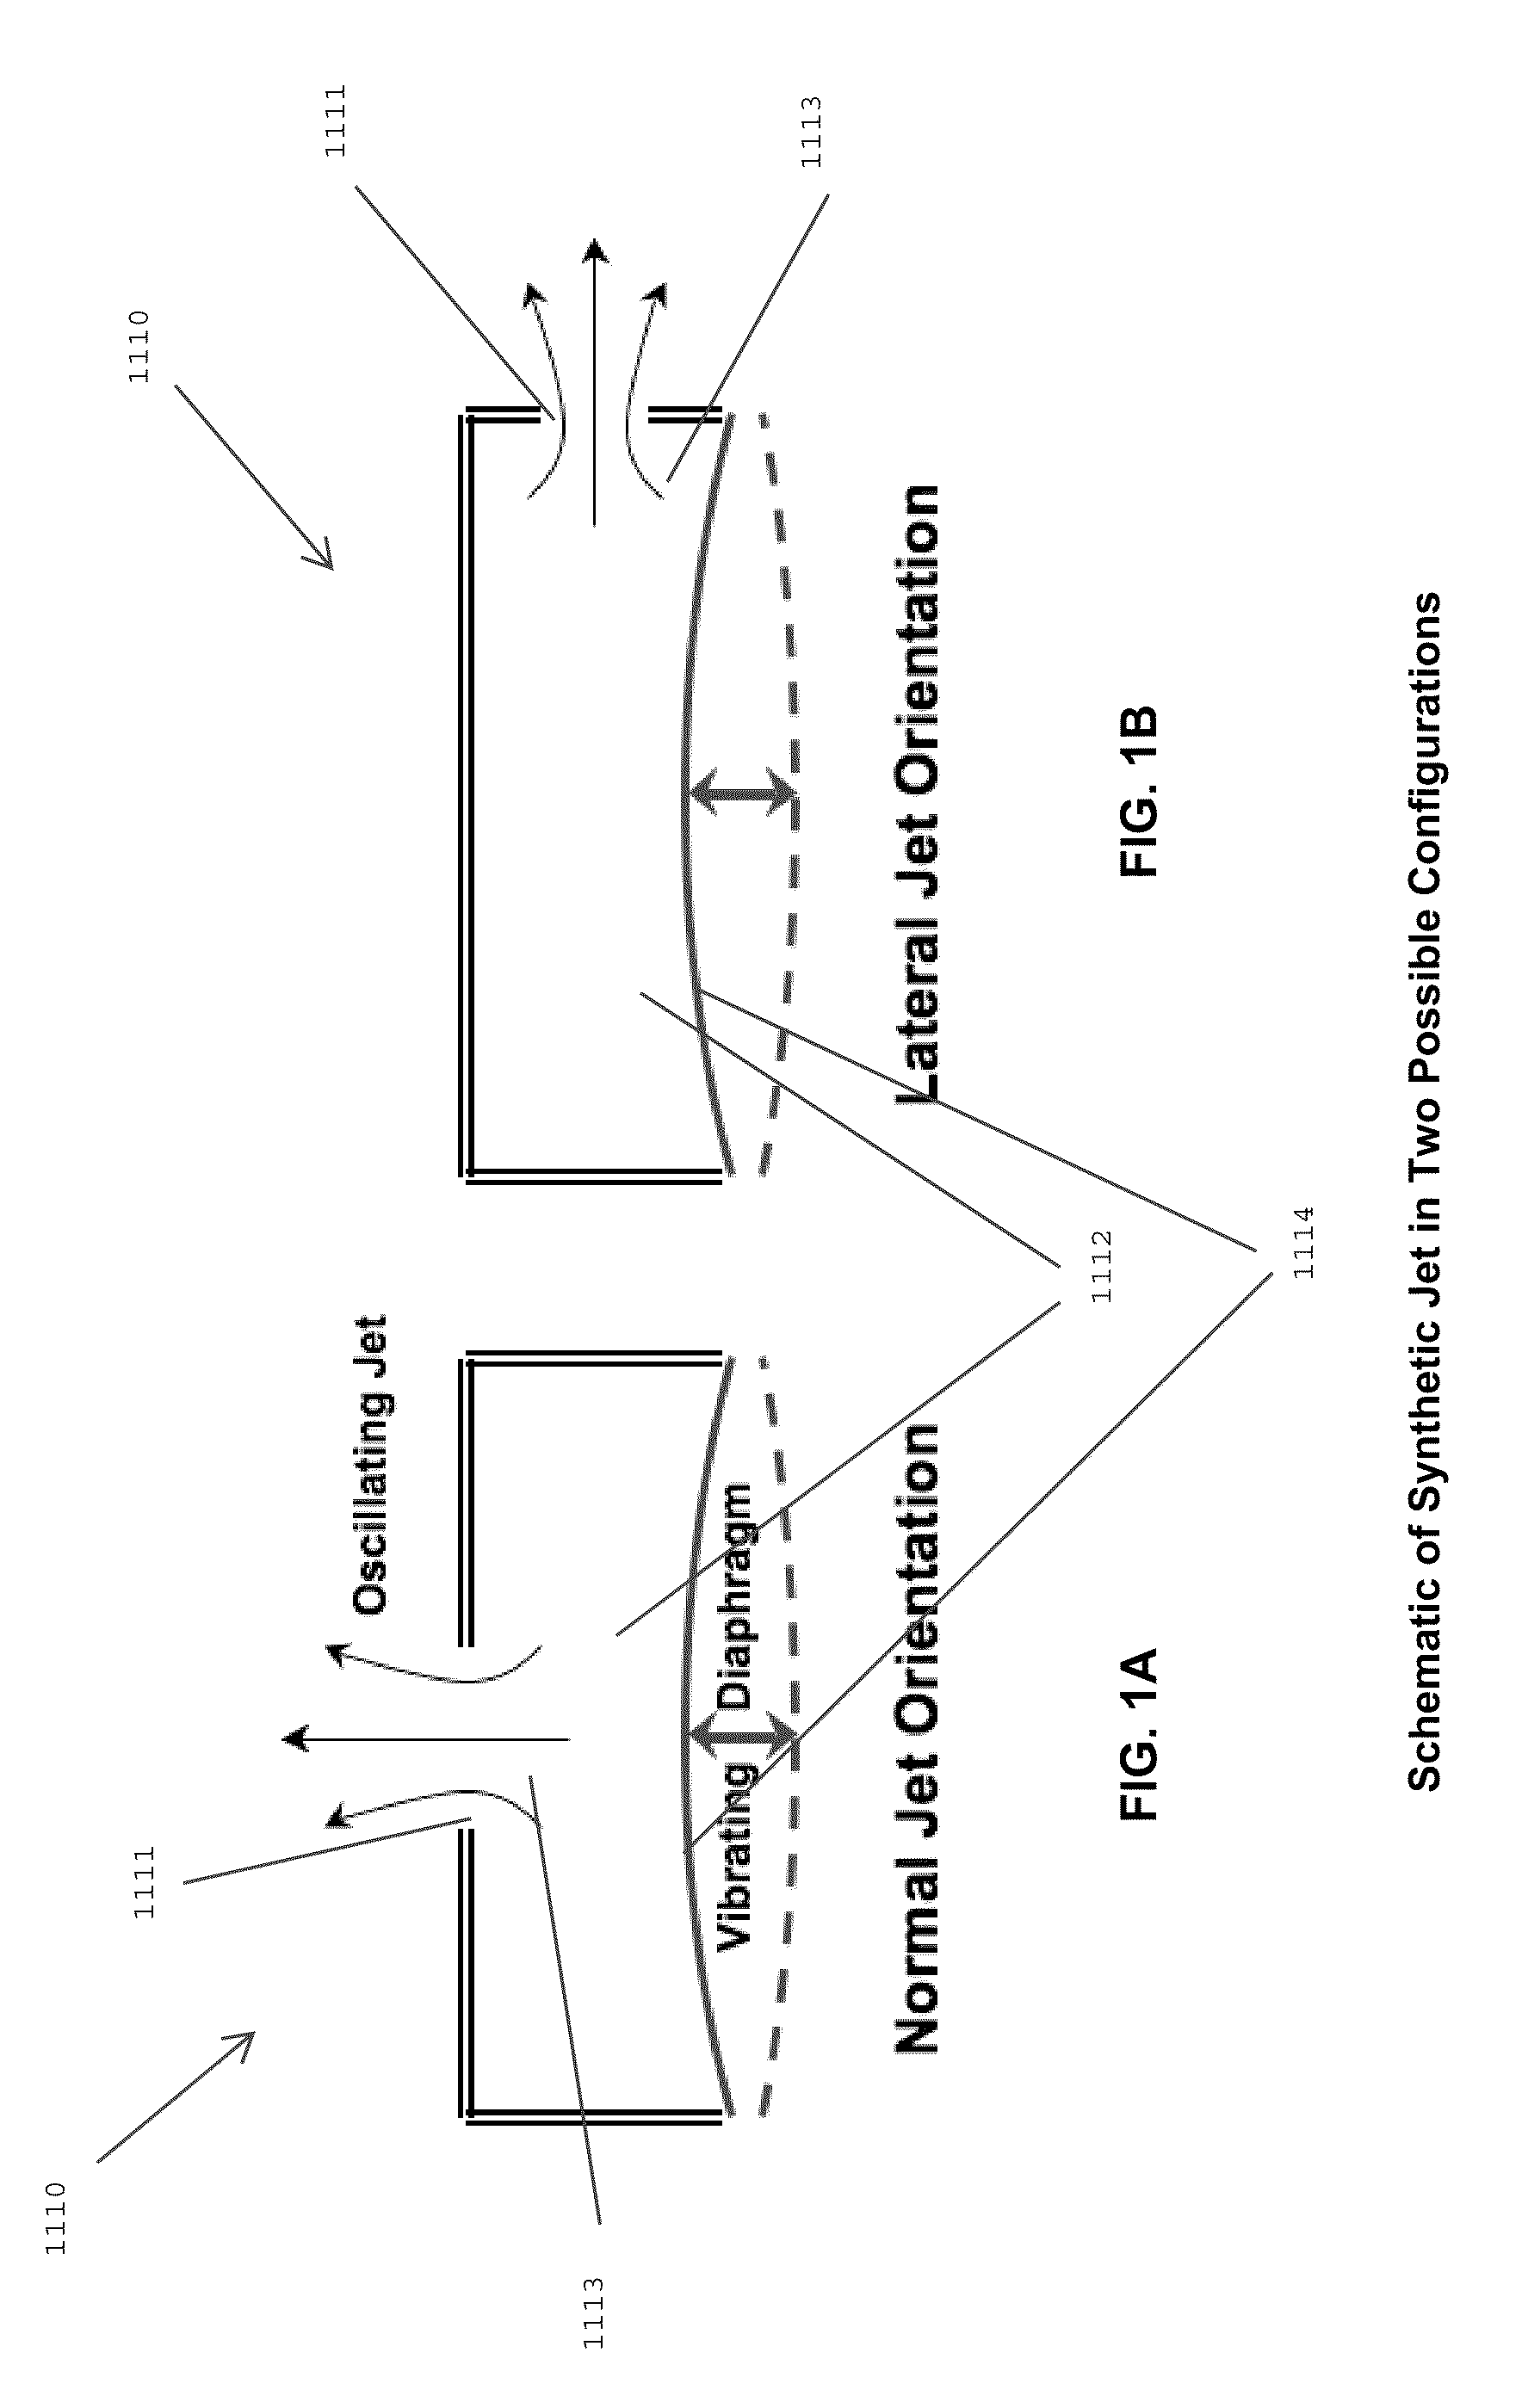 Ducted Fans with Flow Control Synthetic Jet Actuators and Methods for Ducted Fan Force and Moment Control